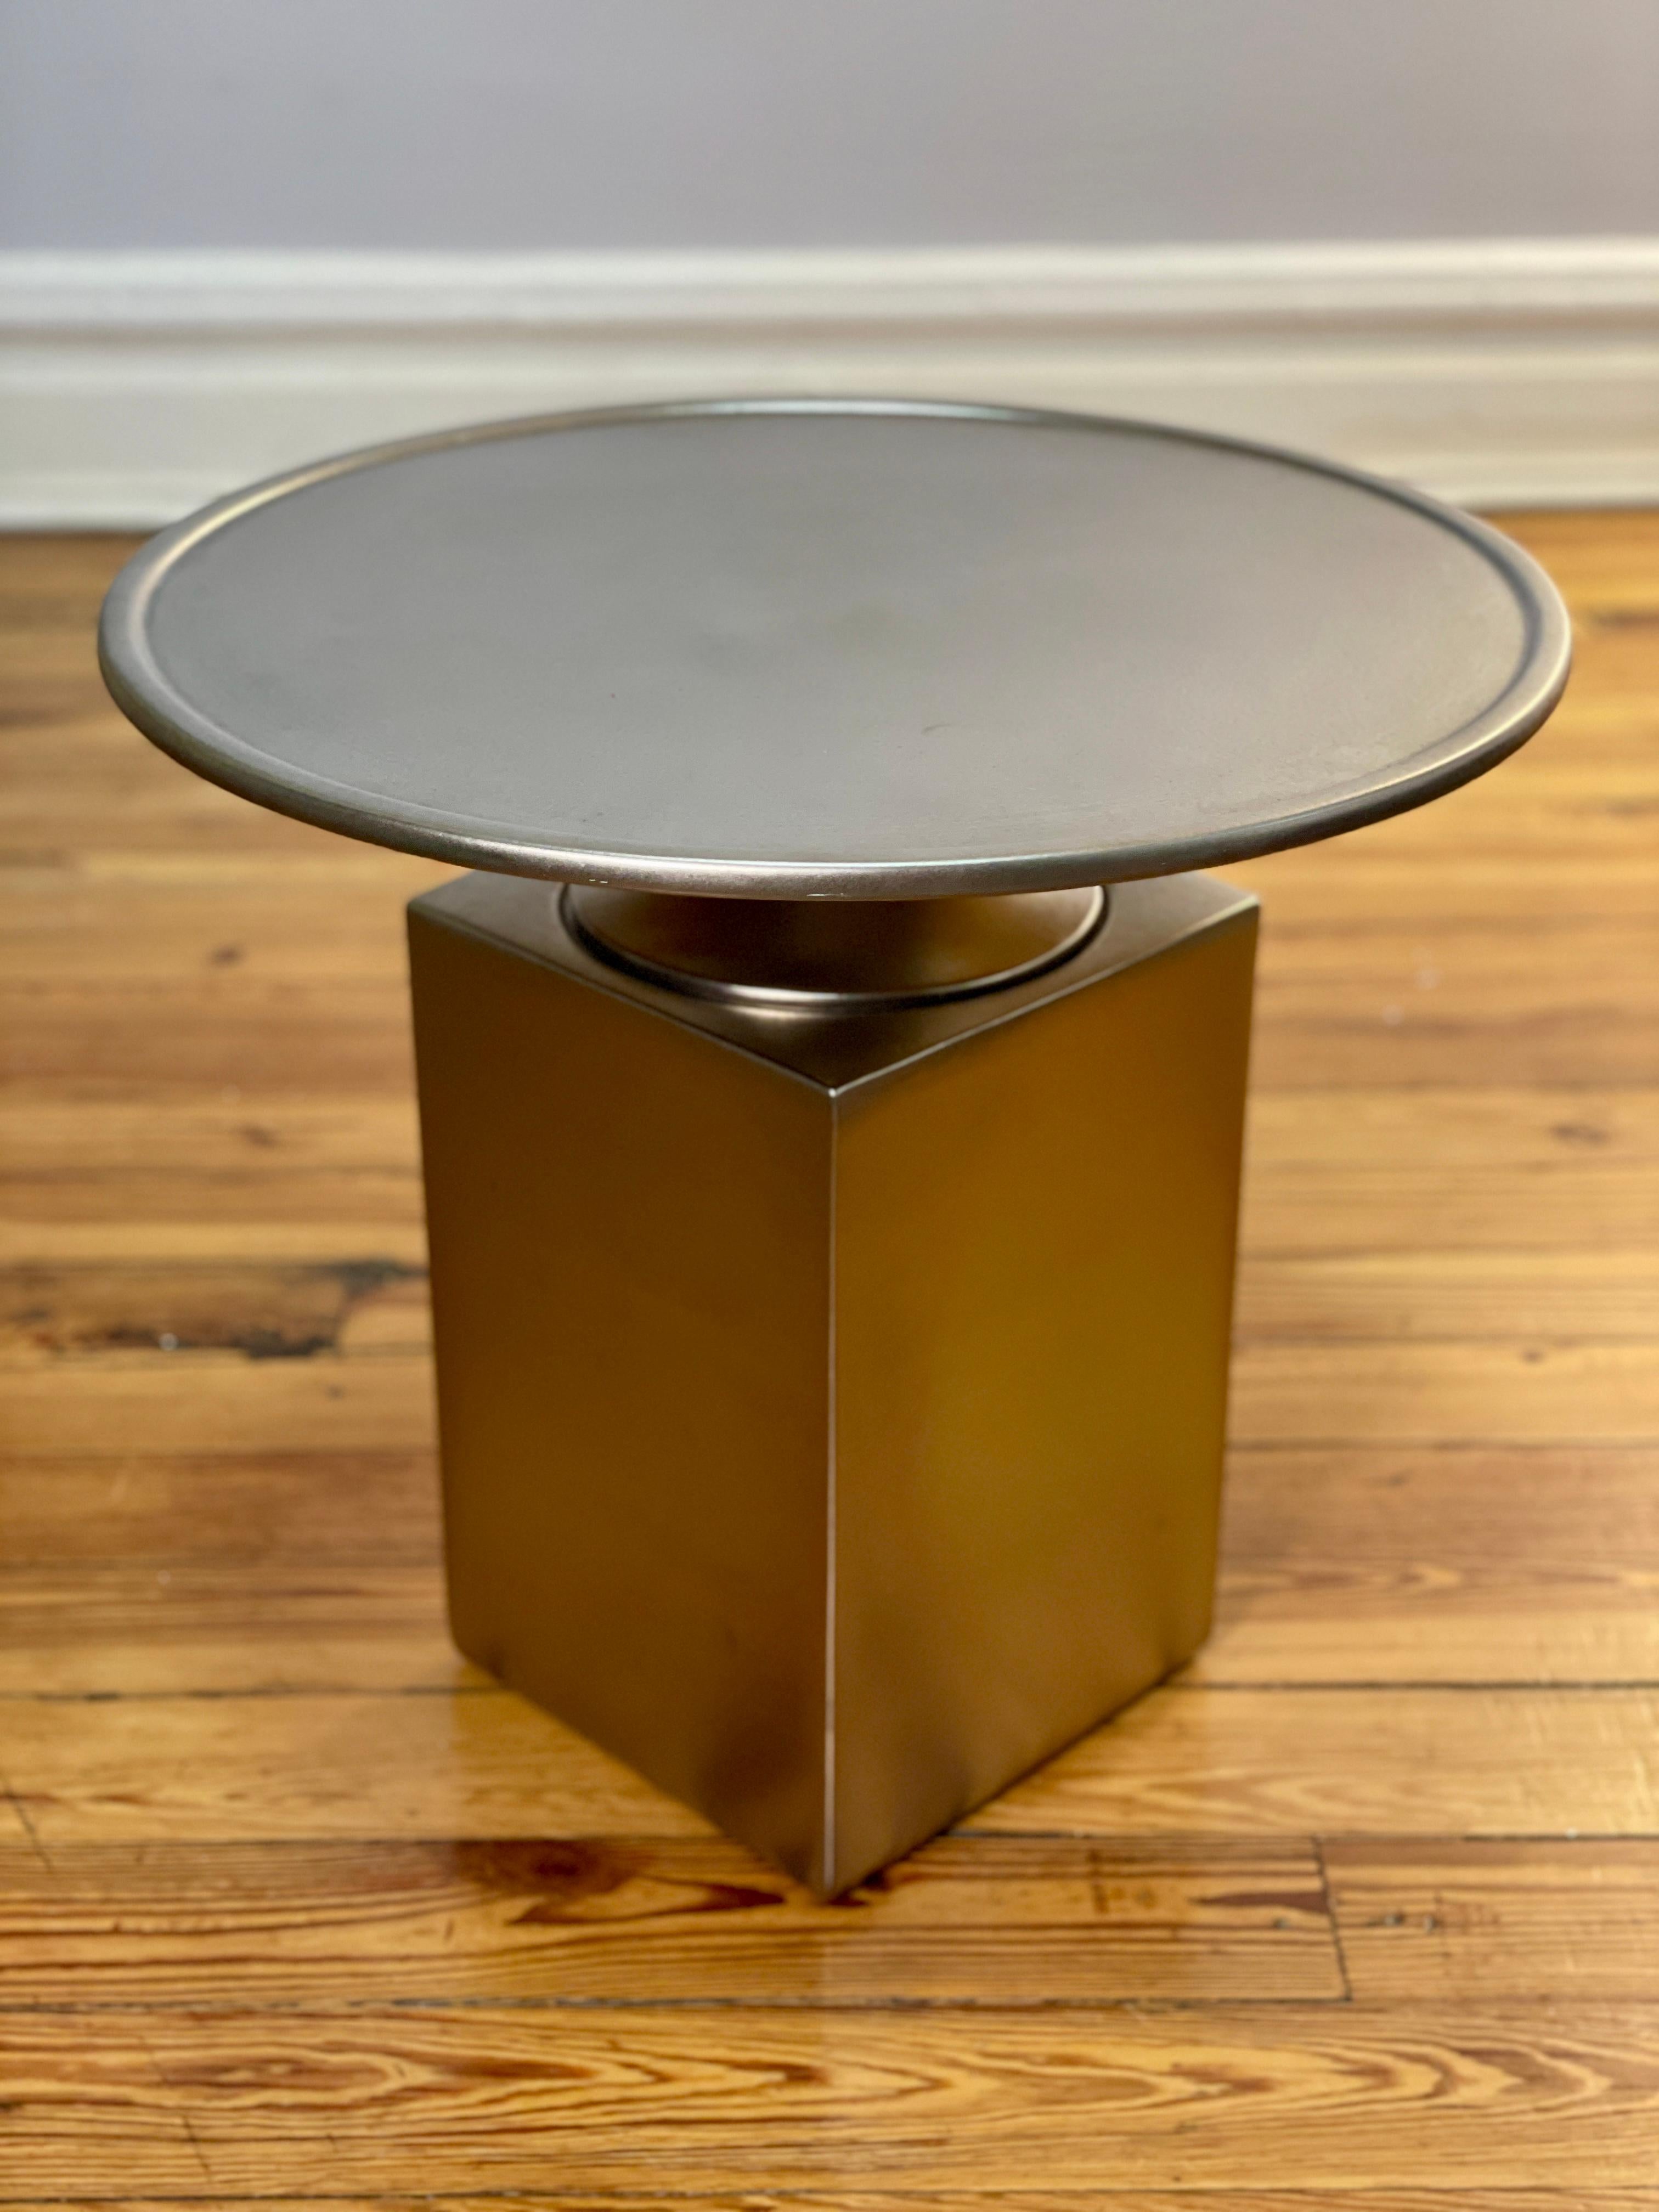 This contemporary side table is part of the Delcourt Collection. Edition by Christophe Delcourt and design by Vincent Dupont-Rougier.  this OUK side table is in ceramic and beautifully glazed with a matte silver tone. Its design resembles a pedestal